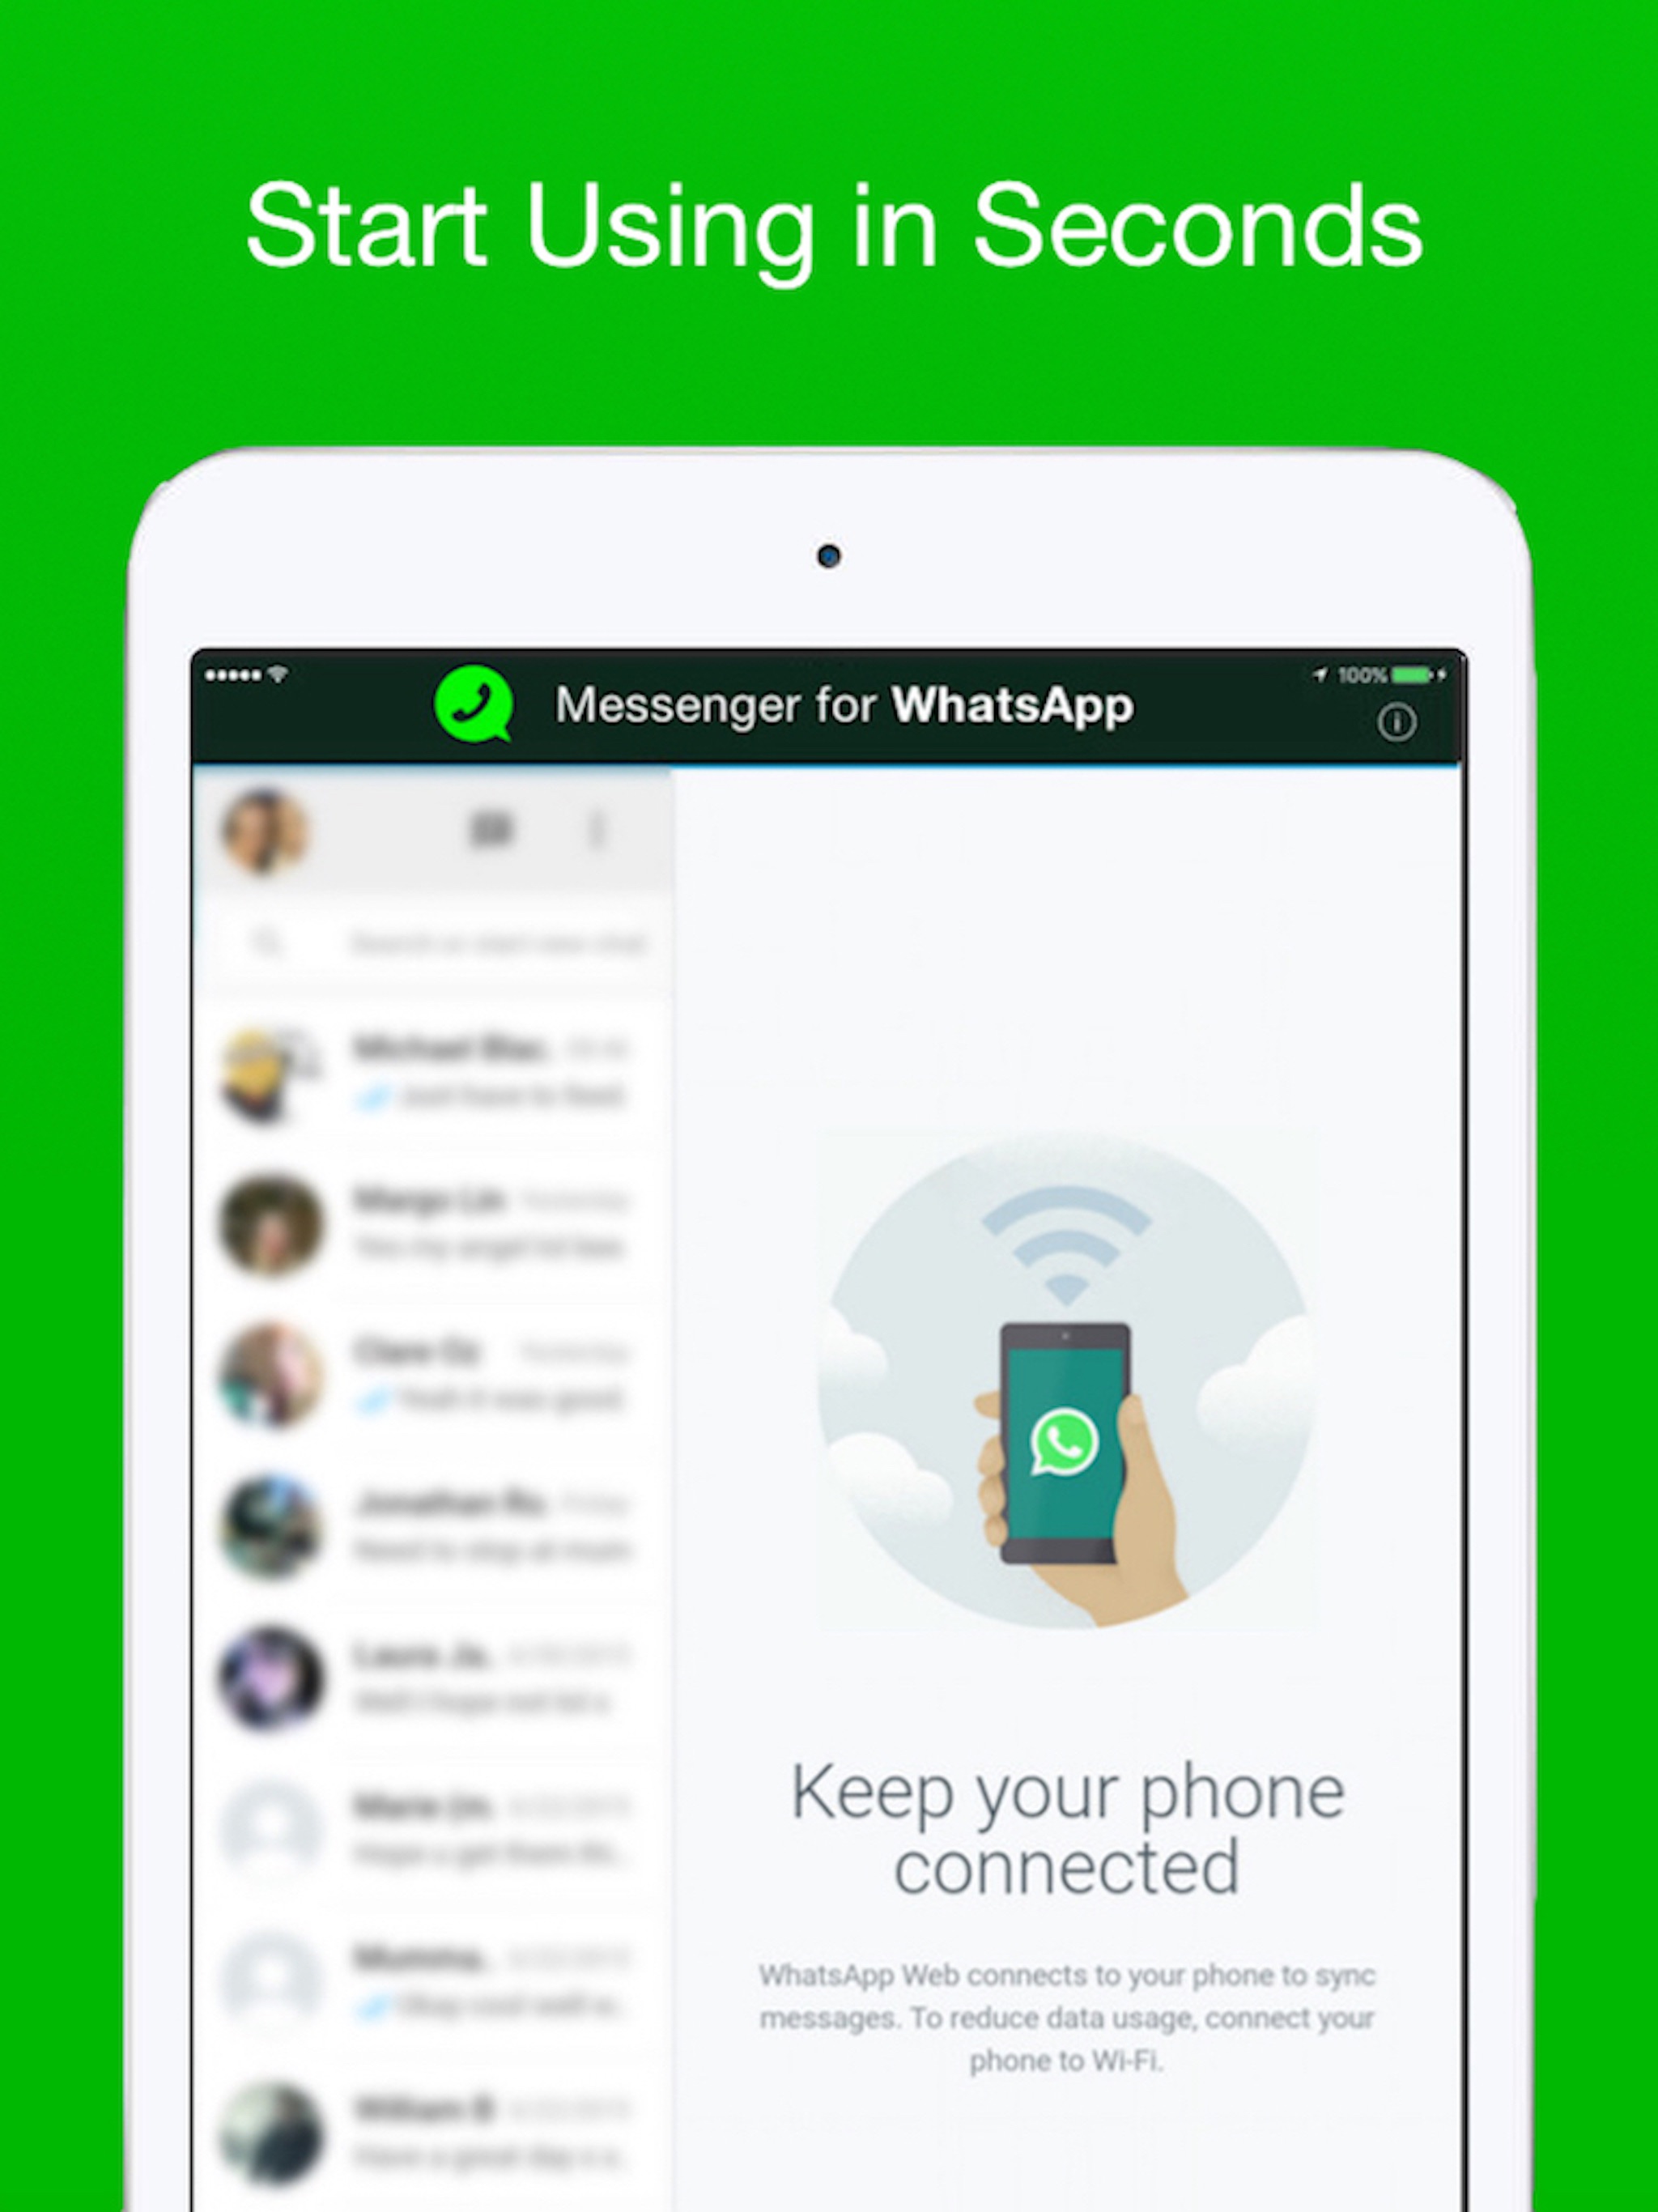 whatsapp messenger free download for android tablet